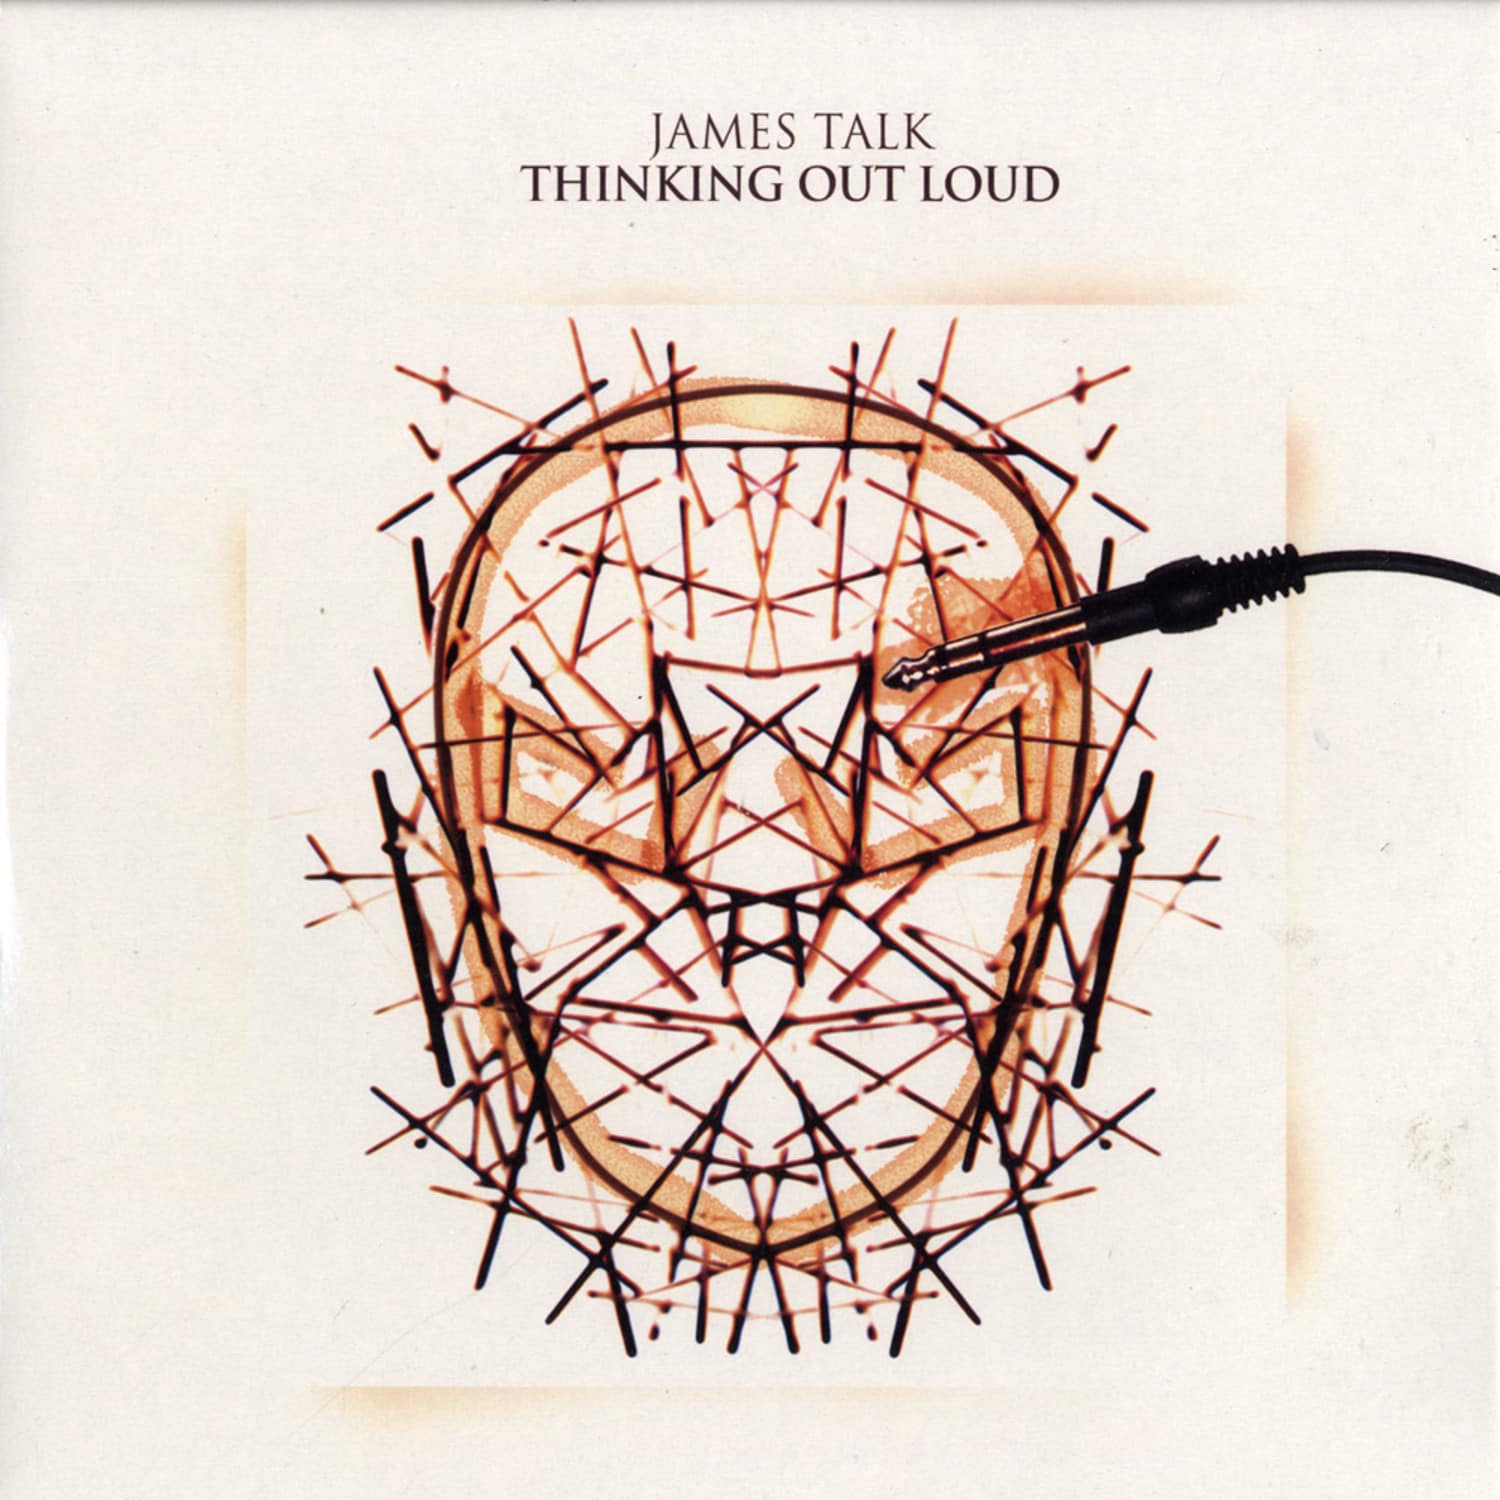 James Talk - THINKING OUT LOUD